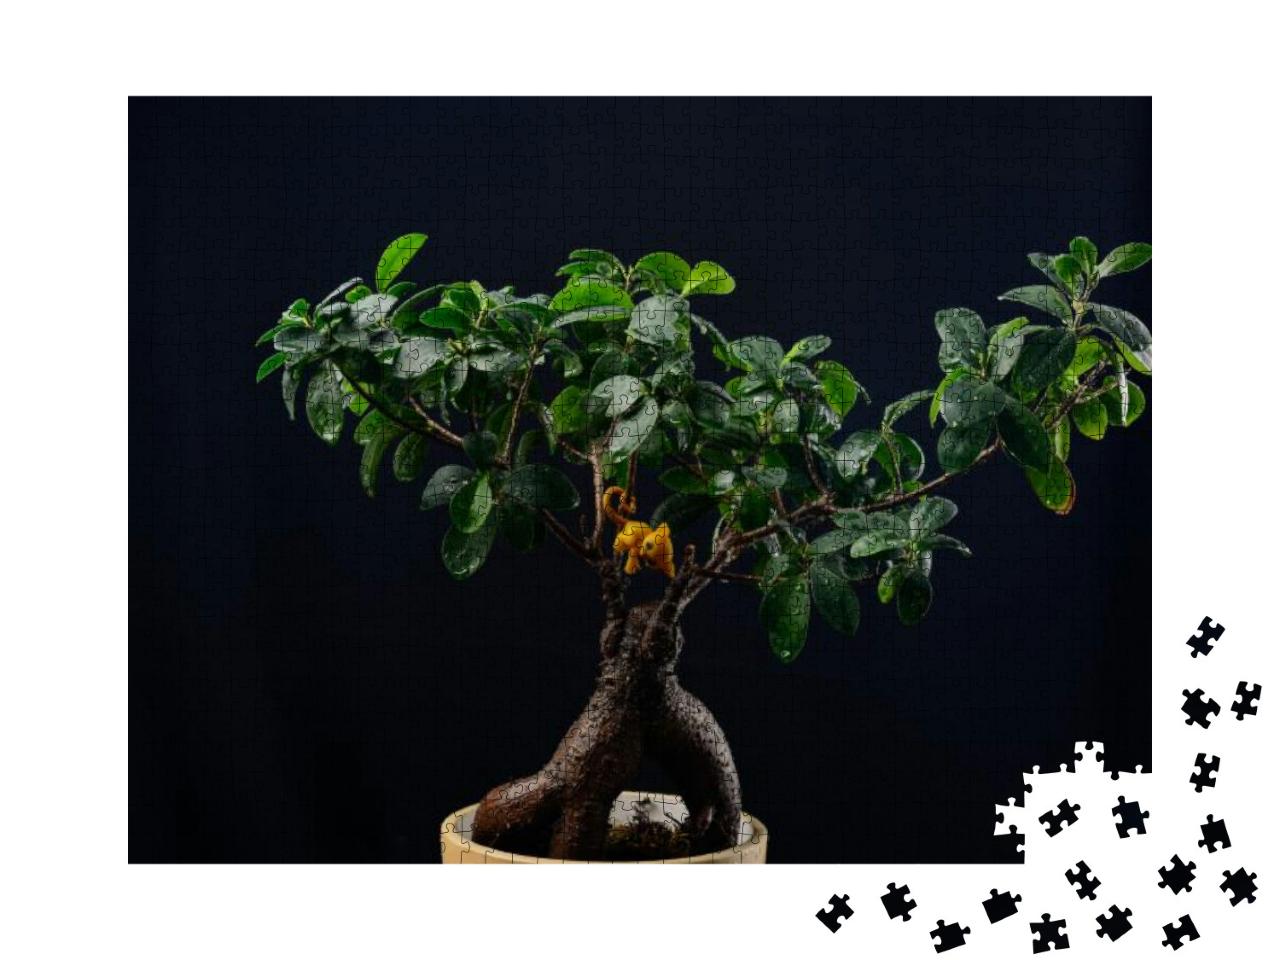 Indoor Plant Ficus Bonsai on a Black Background Close-Up... Jigsaw Puzzle with 1000 pieces